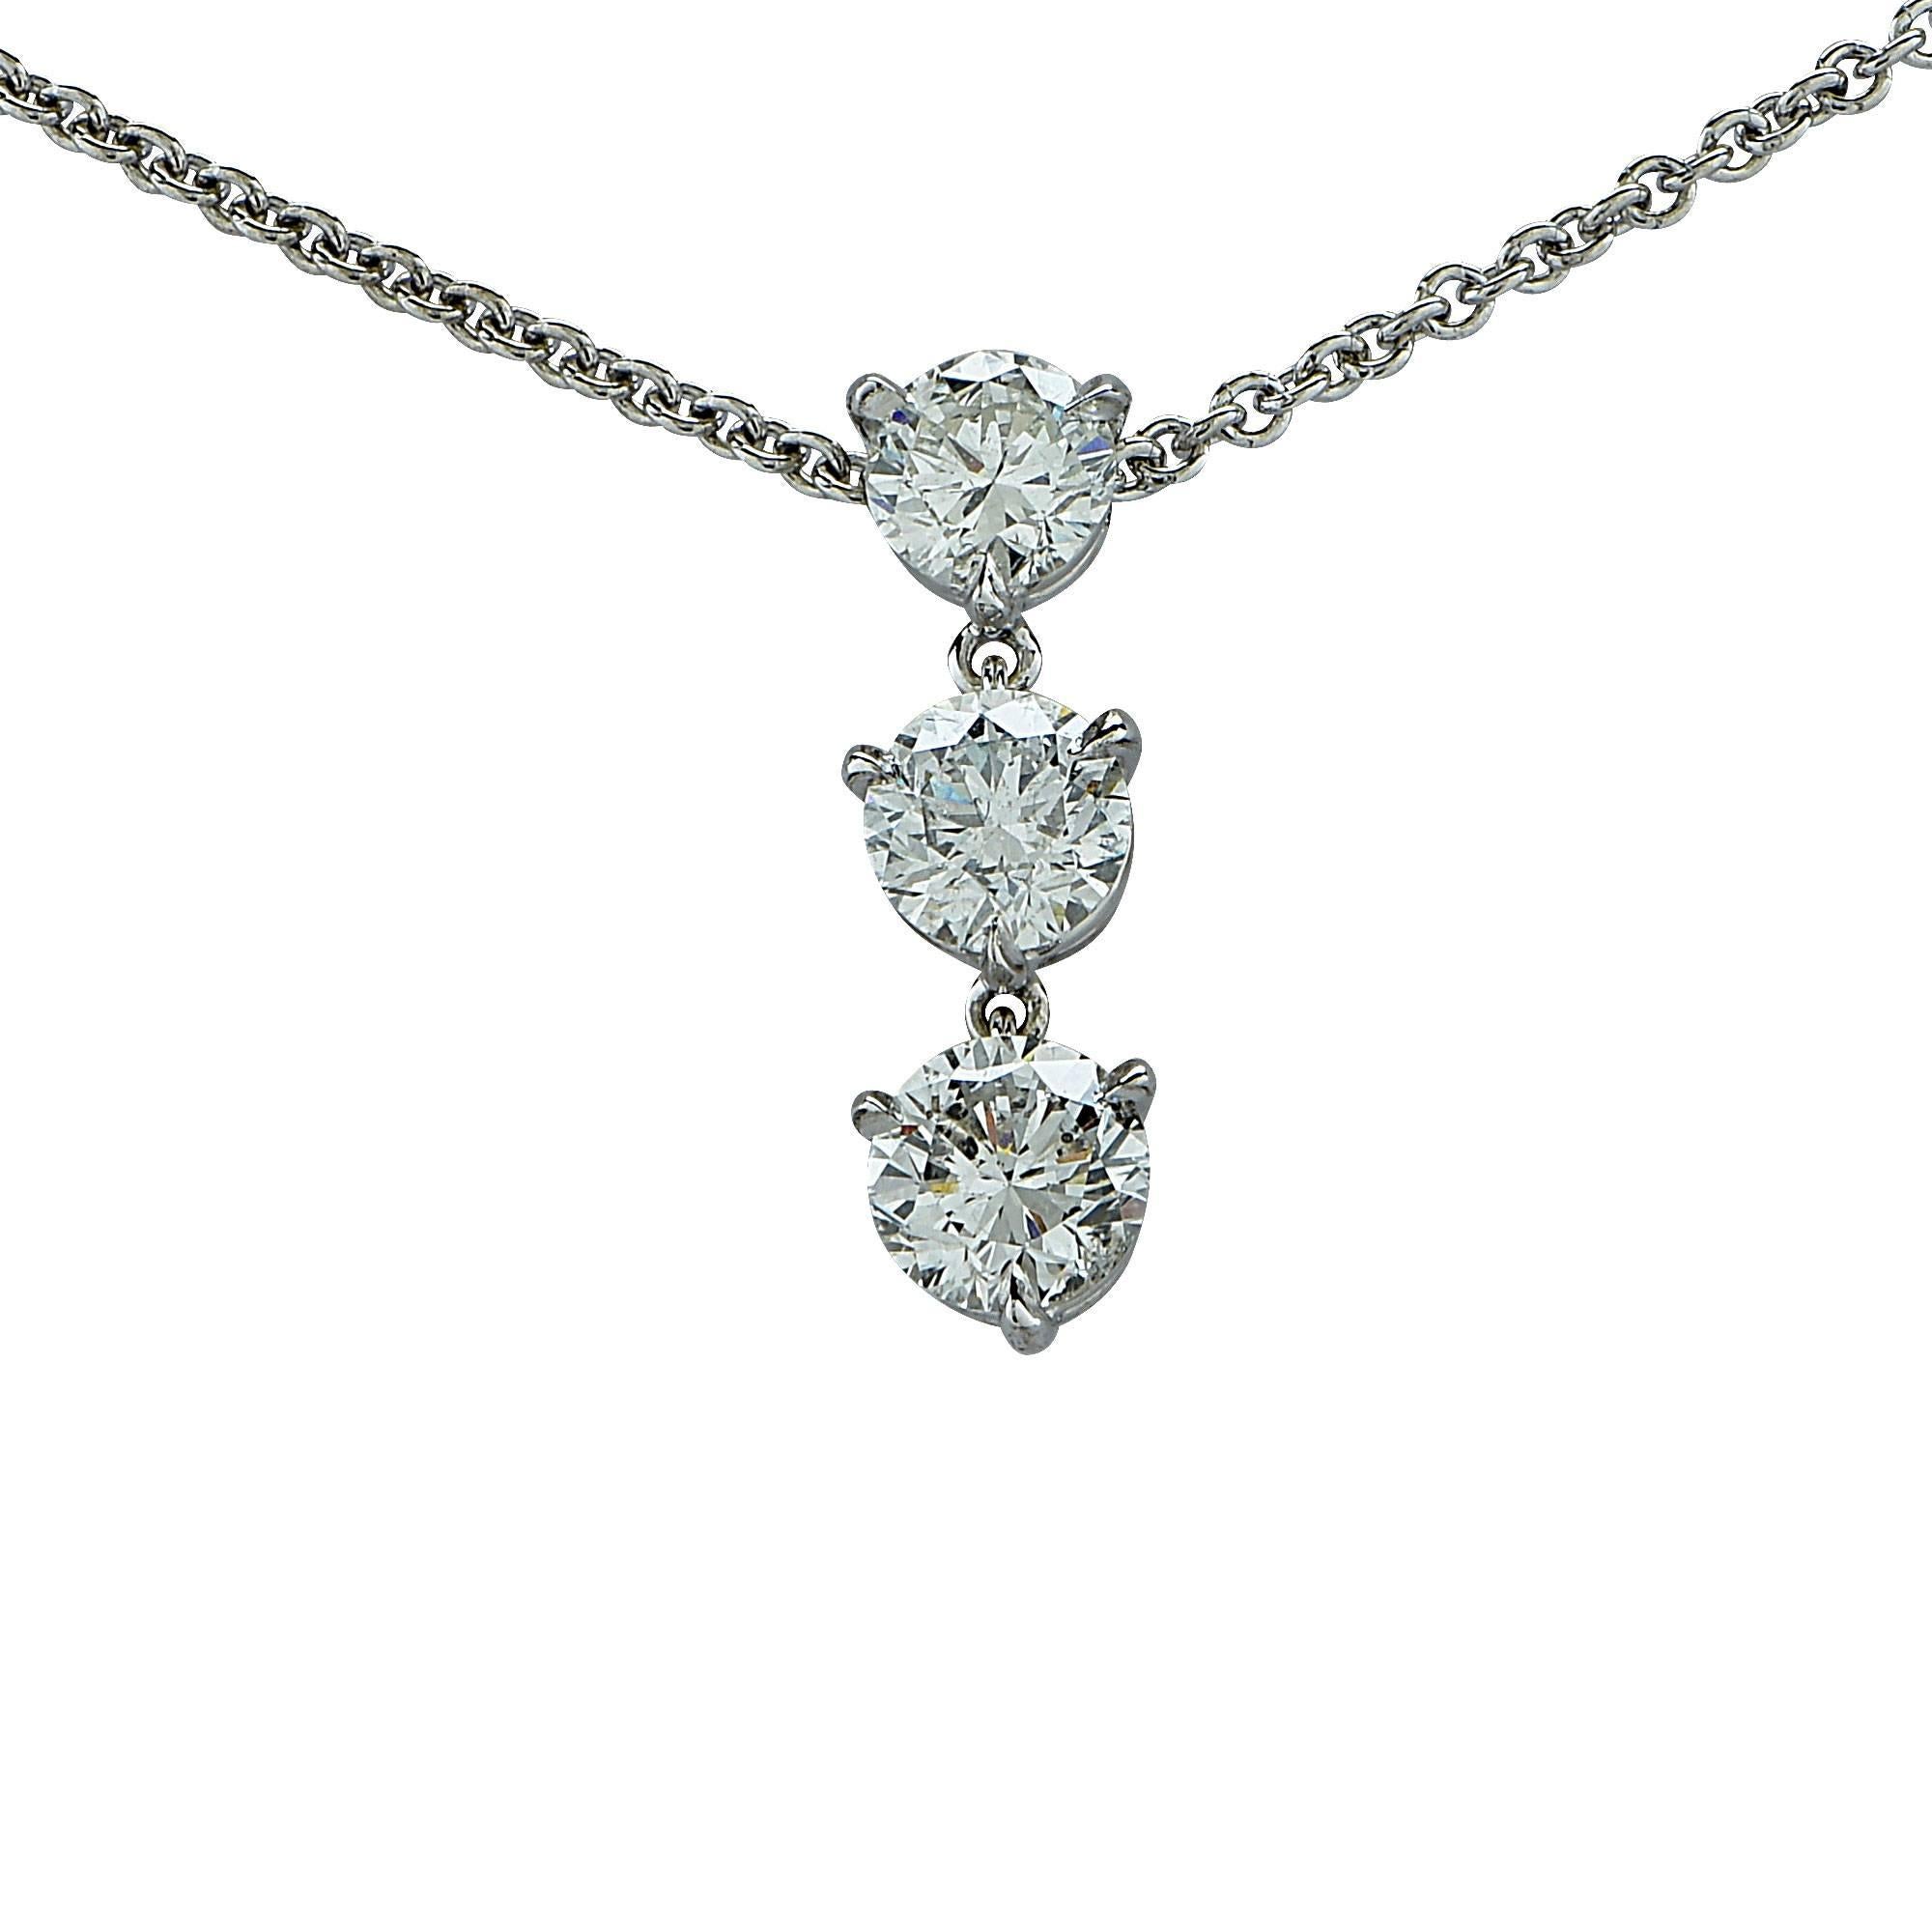 This 18k white gold necklace features a pendant weighing 1.10cts of round brilliant diamonds.

It is stamped and tested as 18k gold.
The metal weight is 4.66 grams.

This diamond ring is accompanied by a retail appraisal performed by a GIA Graduate